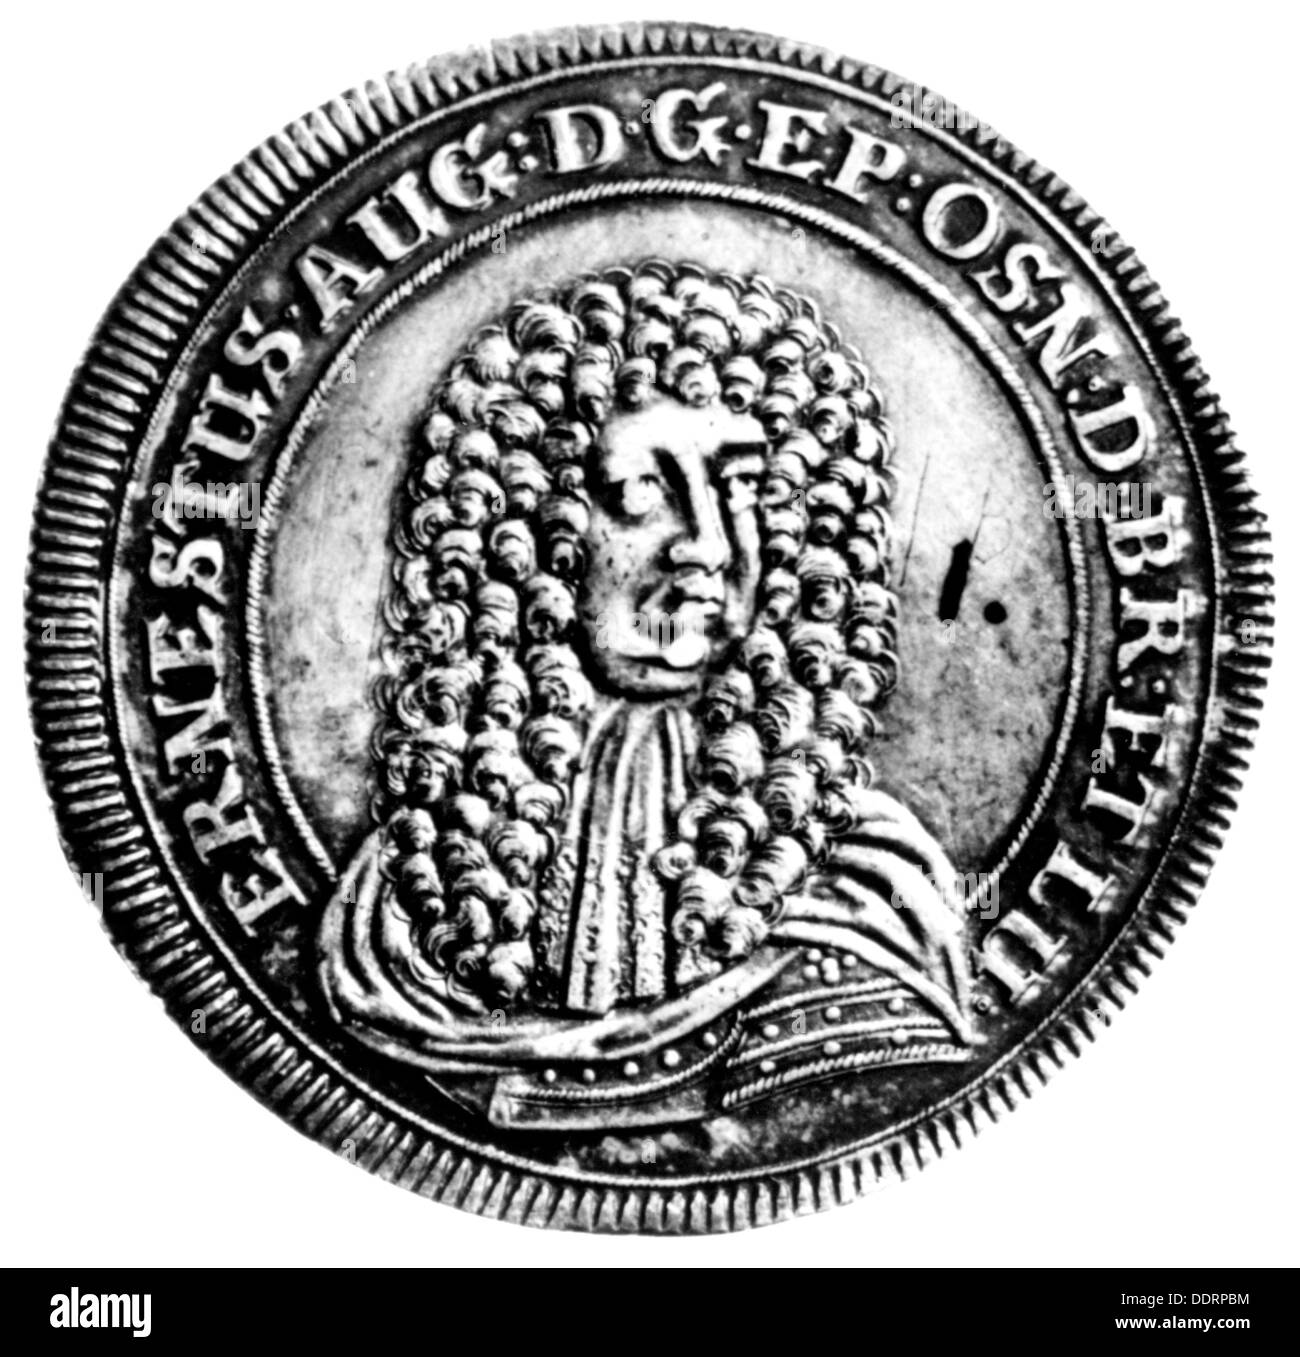 Ernest Augustus I, 30.11.1629 - 2.2.1698, Prince-Elector of Hanover 19.12.1692 - 2.2.1698, portrait on a coin, Taler, silver, Clausthal, 1682, Stock Photo